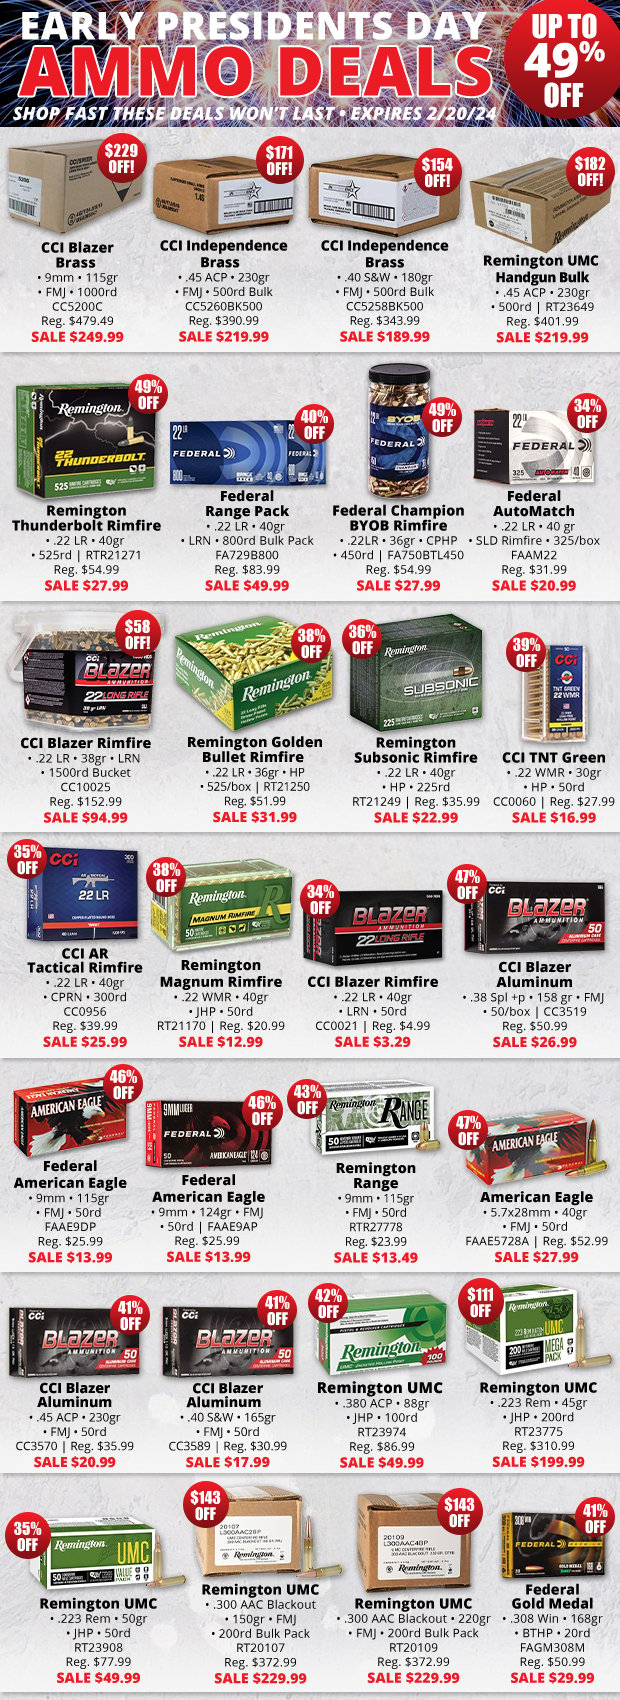 Early Presidents Day Ammo Deals Up to 49% Off!